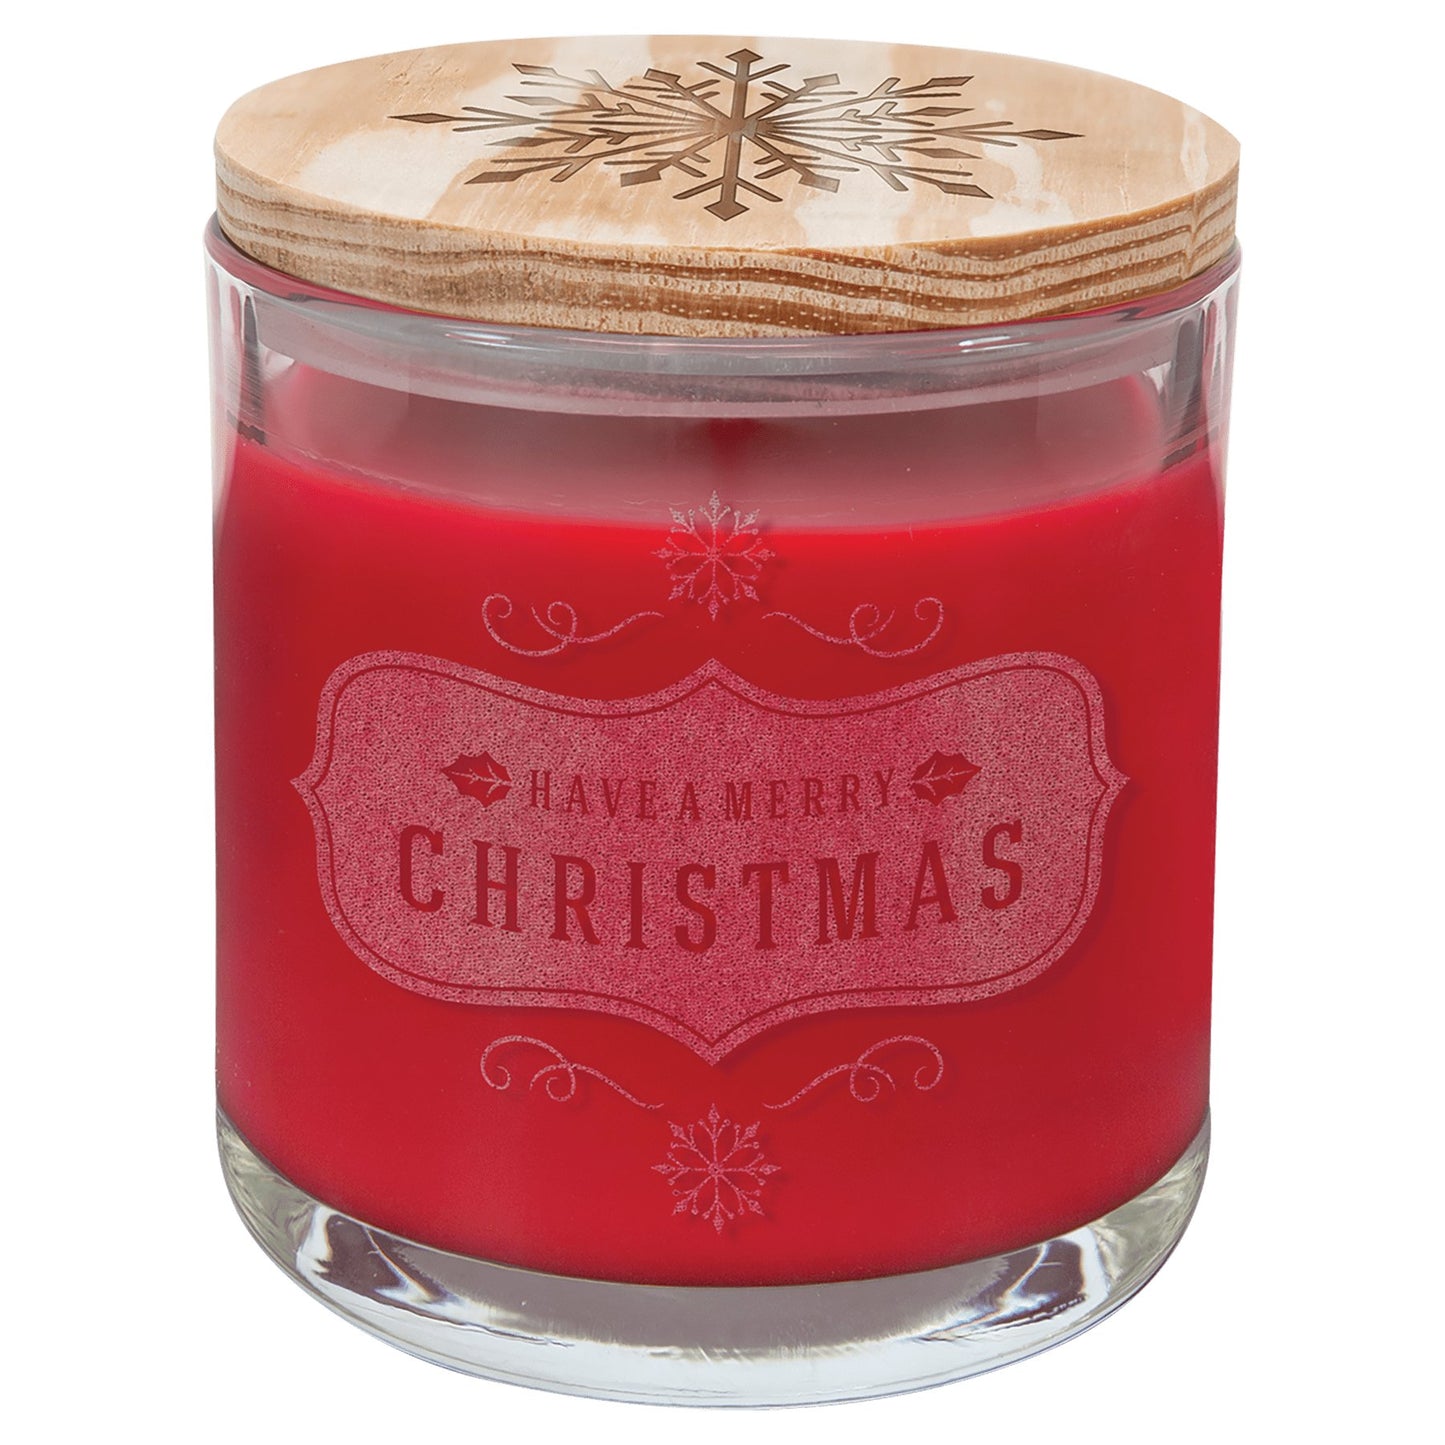 Customizable Scented Candle in a Glass Holder with Wood Lid - Legacy Creator IncPeppermint Twist